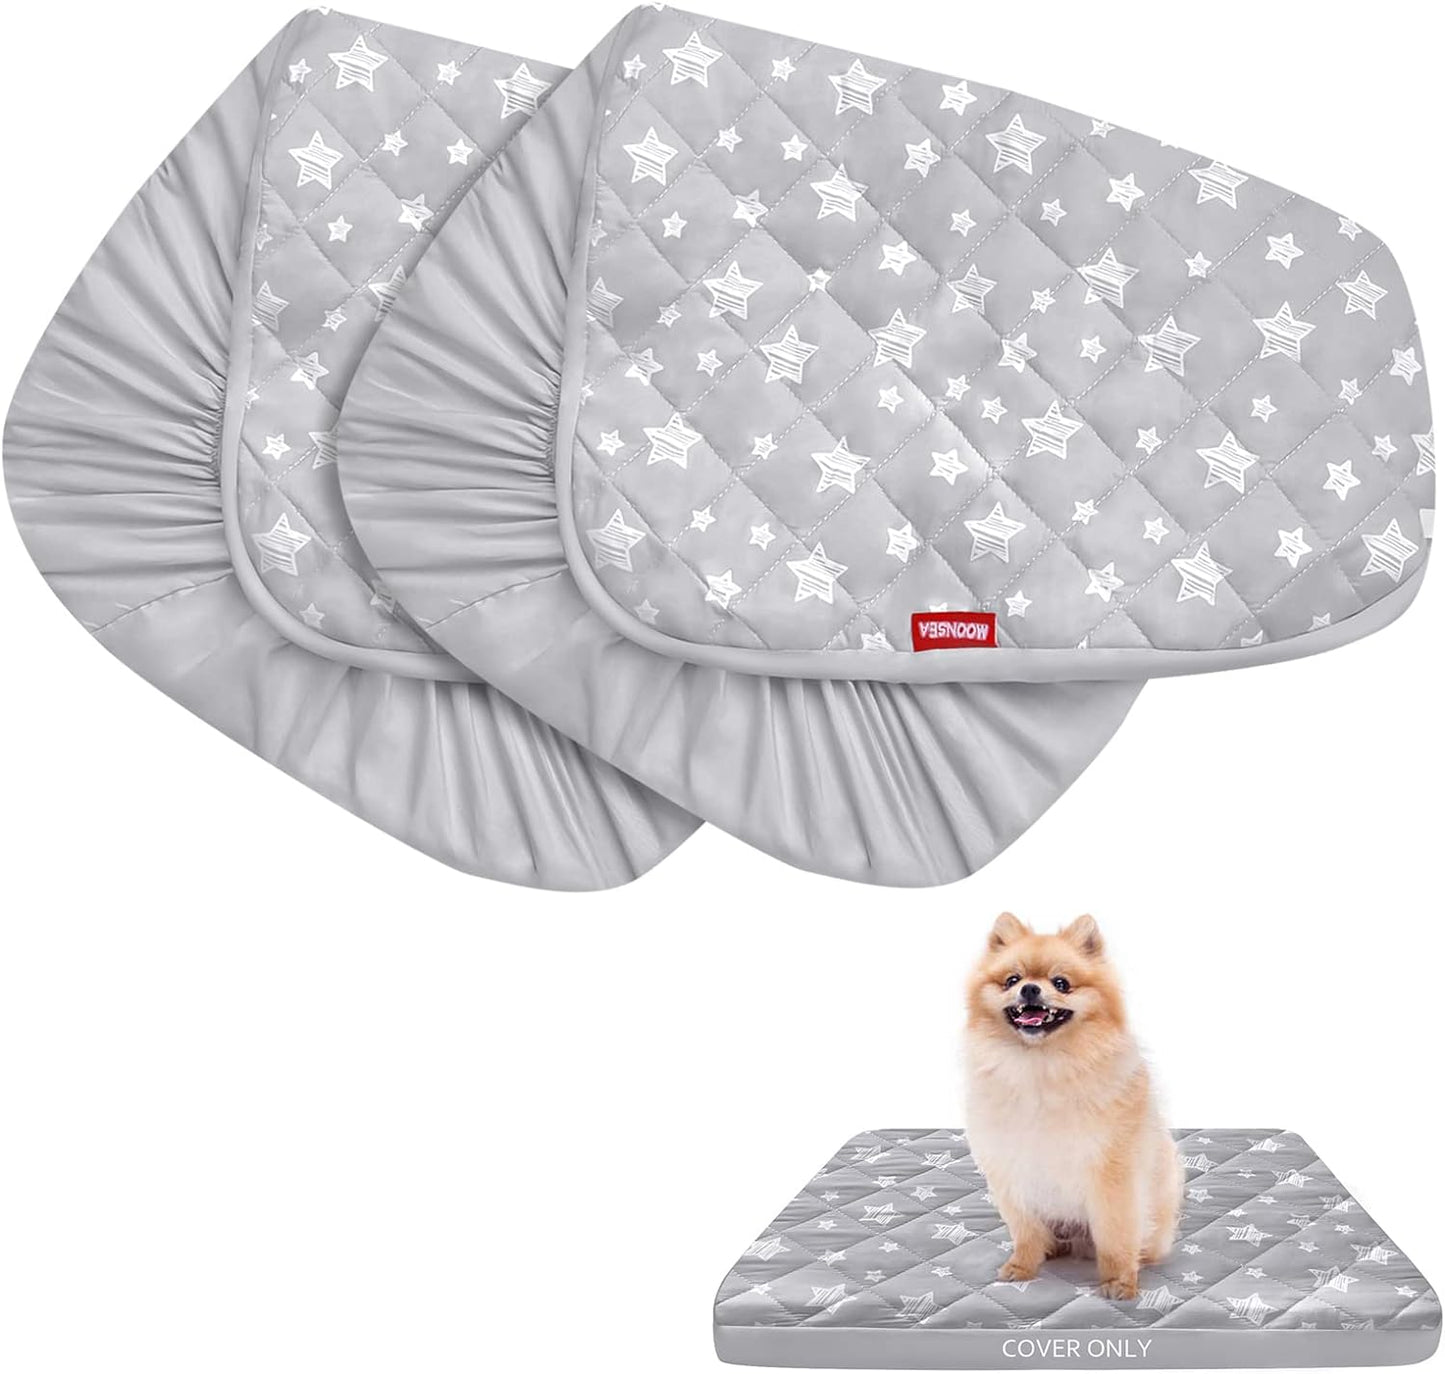 Dog Bed Covers, Waterproof Dog Bed Covers Dog Pillow Cover Quilted, 16x25 Inches, for Dog/Cat, 2 Pack-Moonsea Bedding